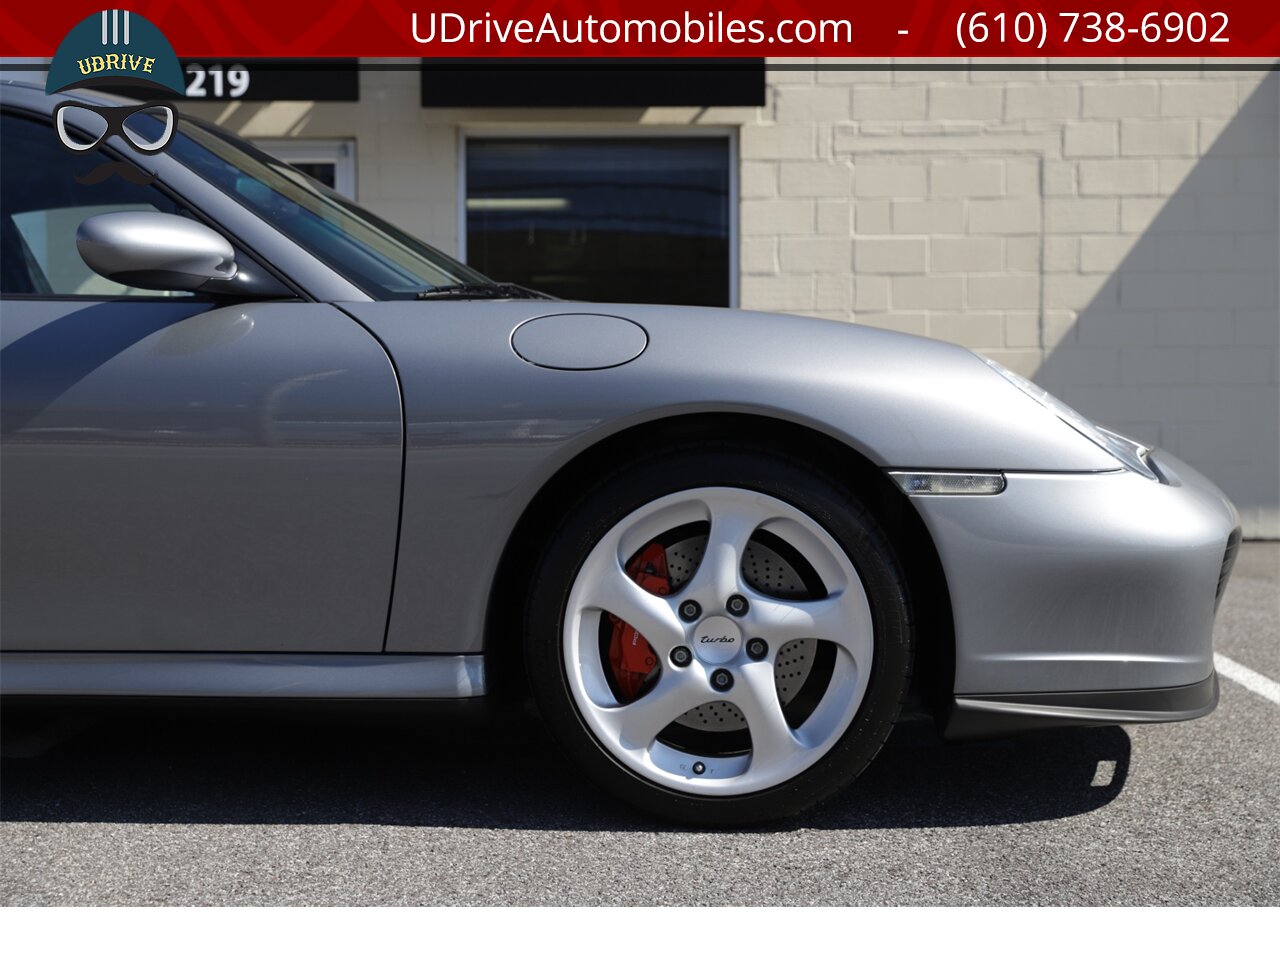 2003 Porsche 911 996 Turbo X50 Power Kit 6 Speed Seal Grey  over Black Leather - Photo 16 - West Chester, PA 19382